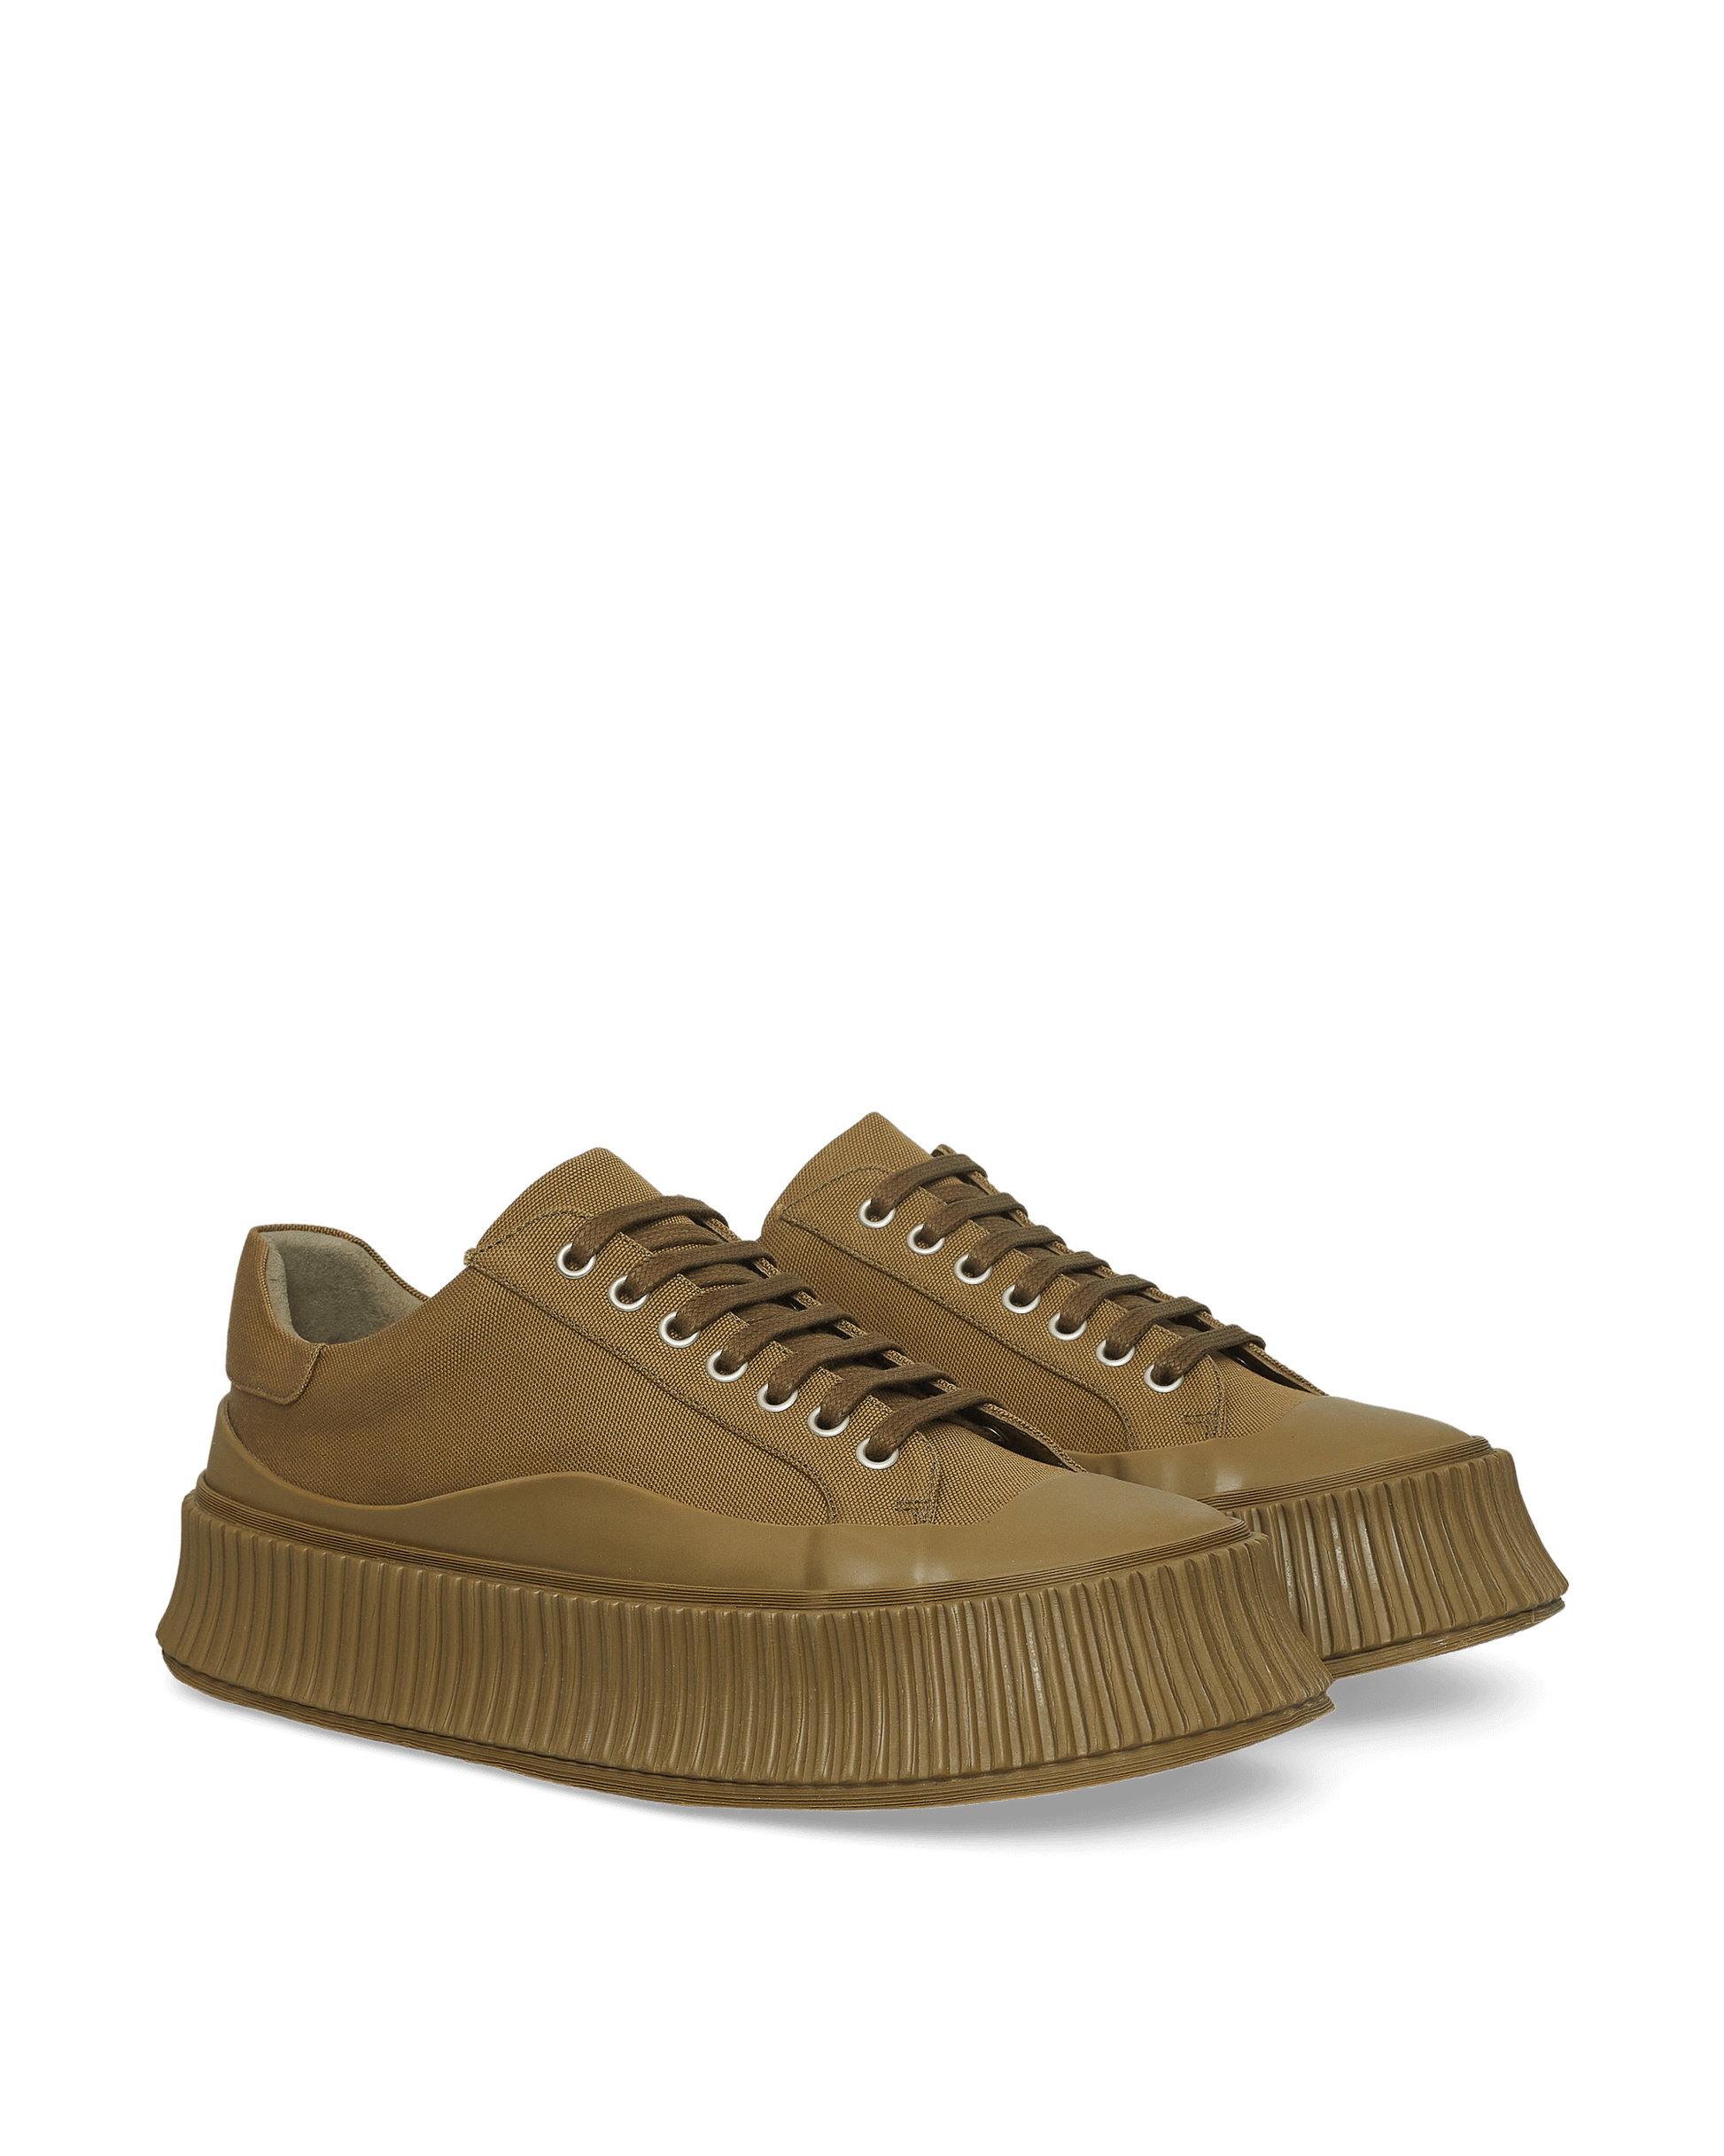 Jil Sander Sneaker - Recycled Canvas 568 Quercia+ Sole O Light/Pastel B Coats and Jackets Low JI32535B-15611 230